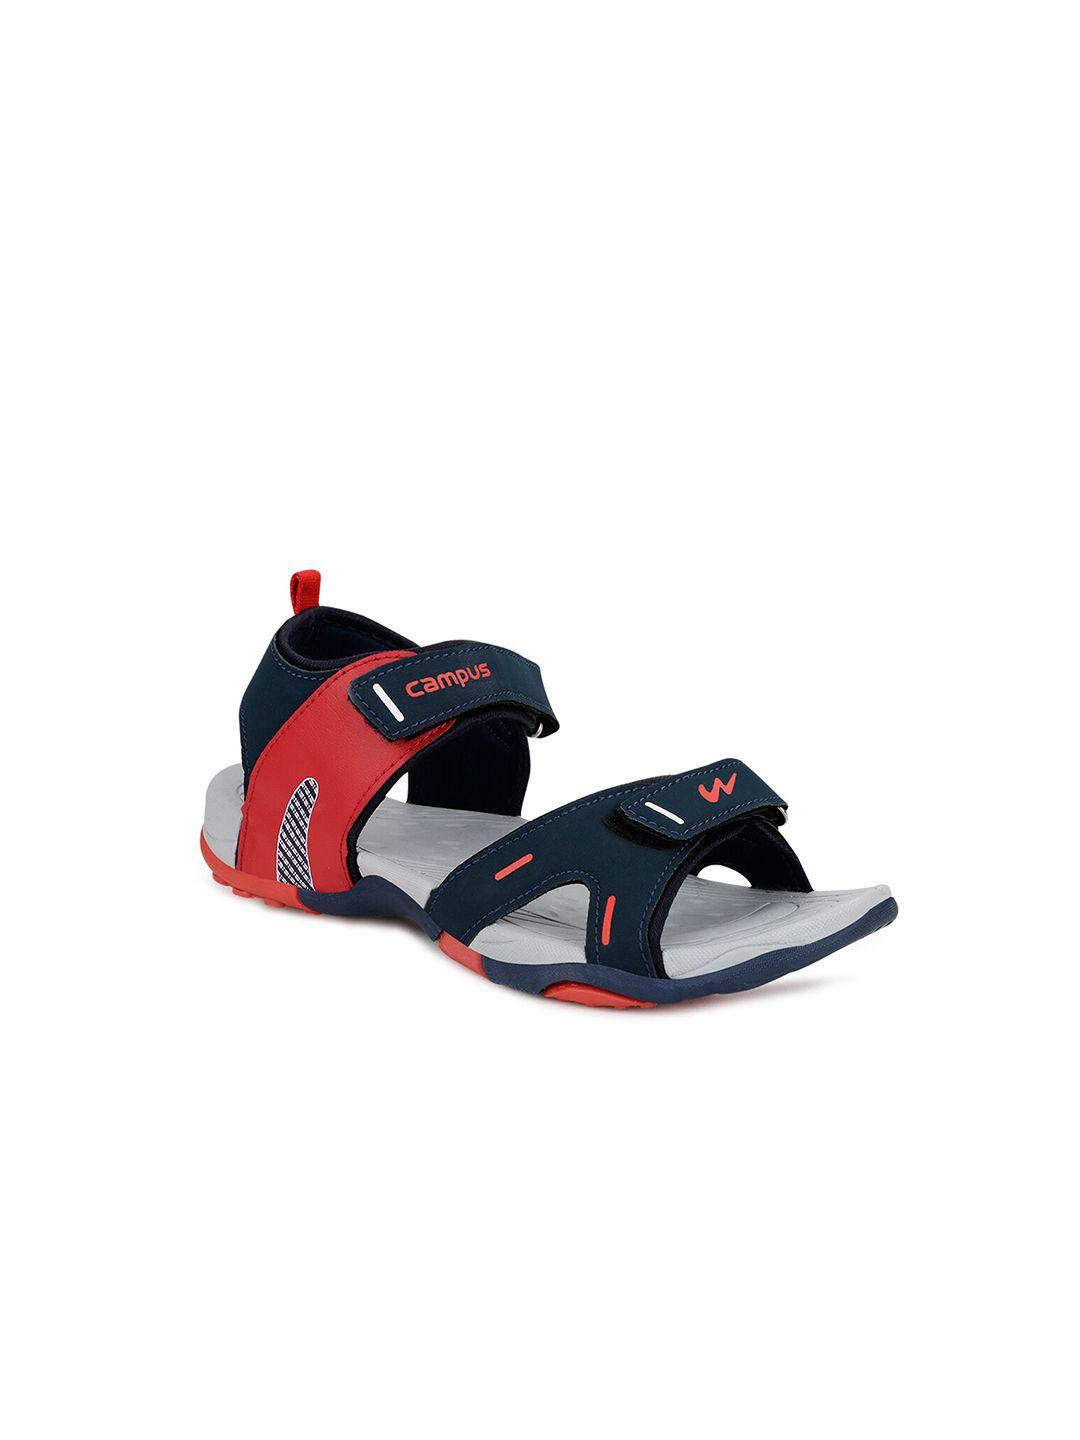 campus kids navy blue & red printed sports sandals